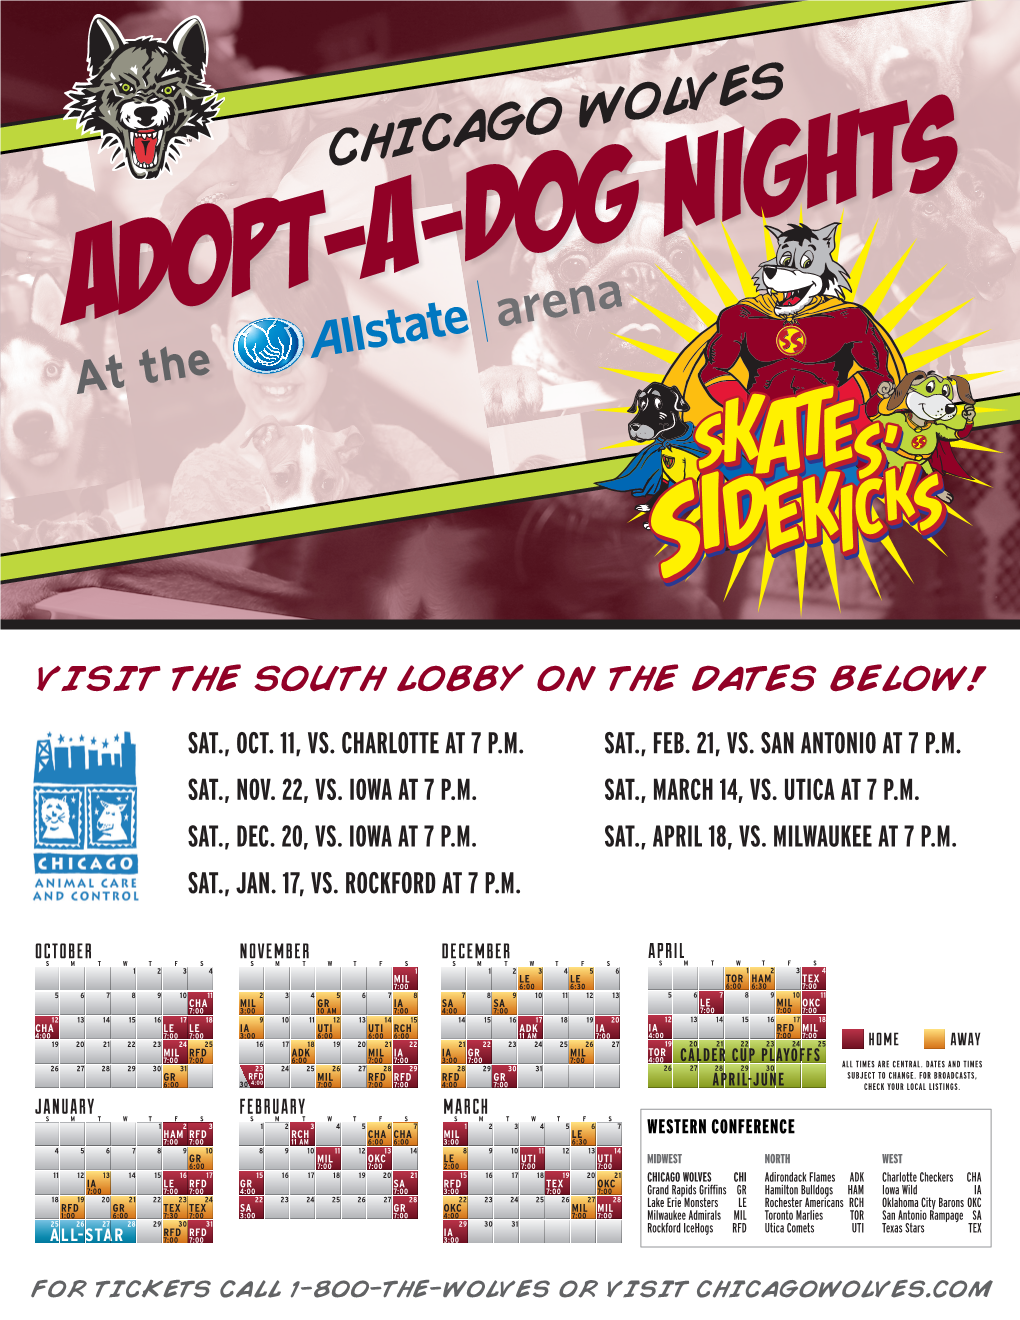 CHICAGO WOLVES ADOPT-A-DOG NIGHTS at The